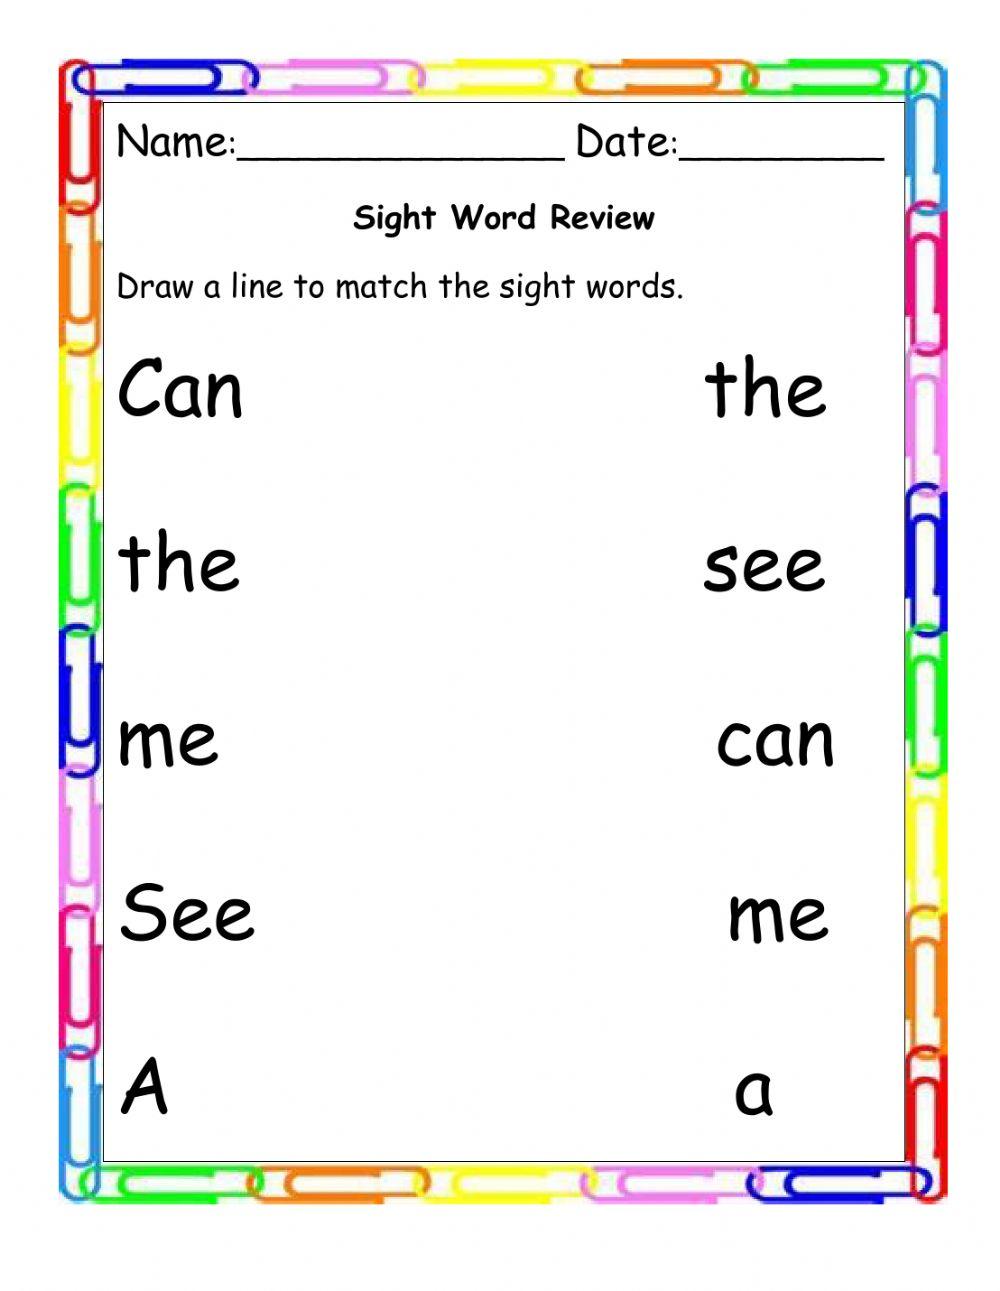 Sight Word Review 1